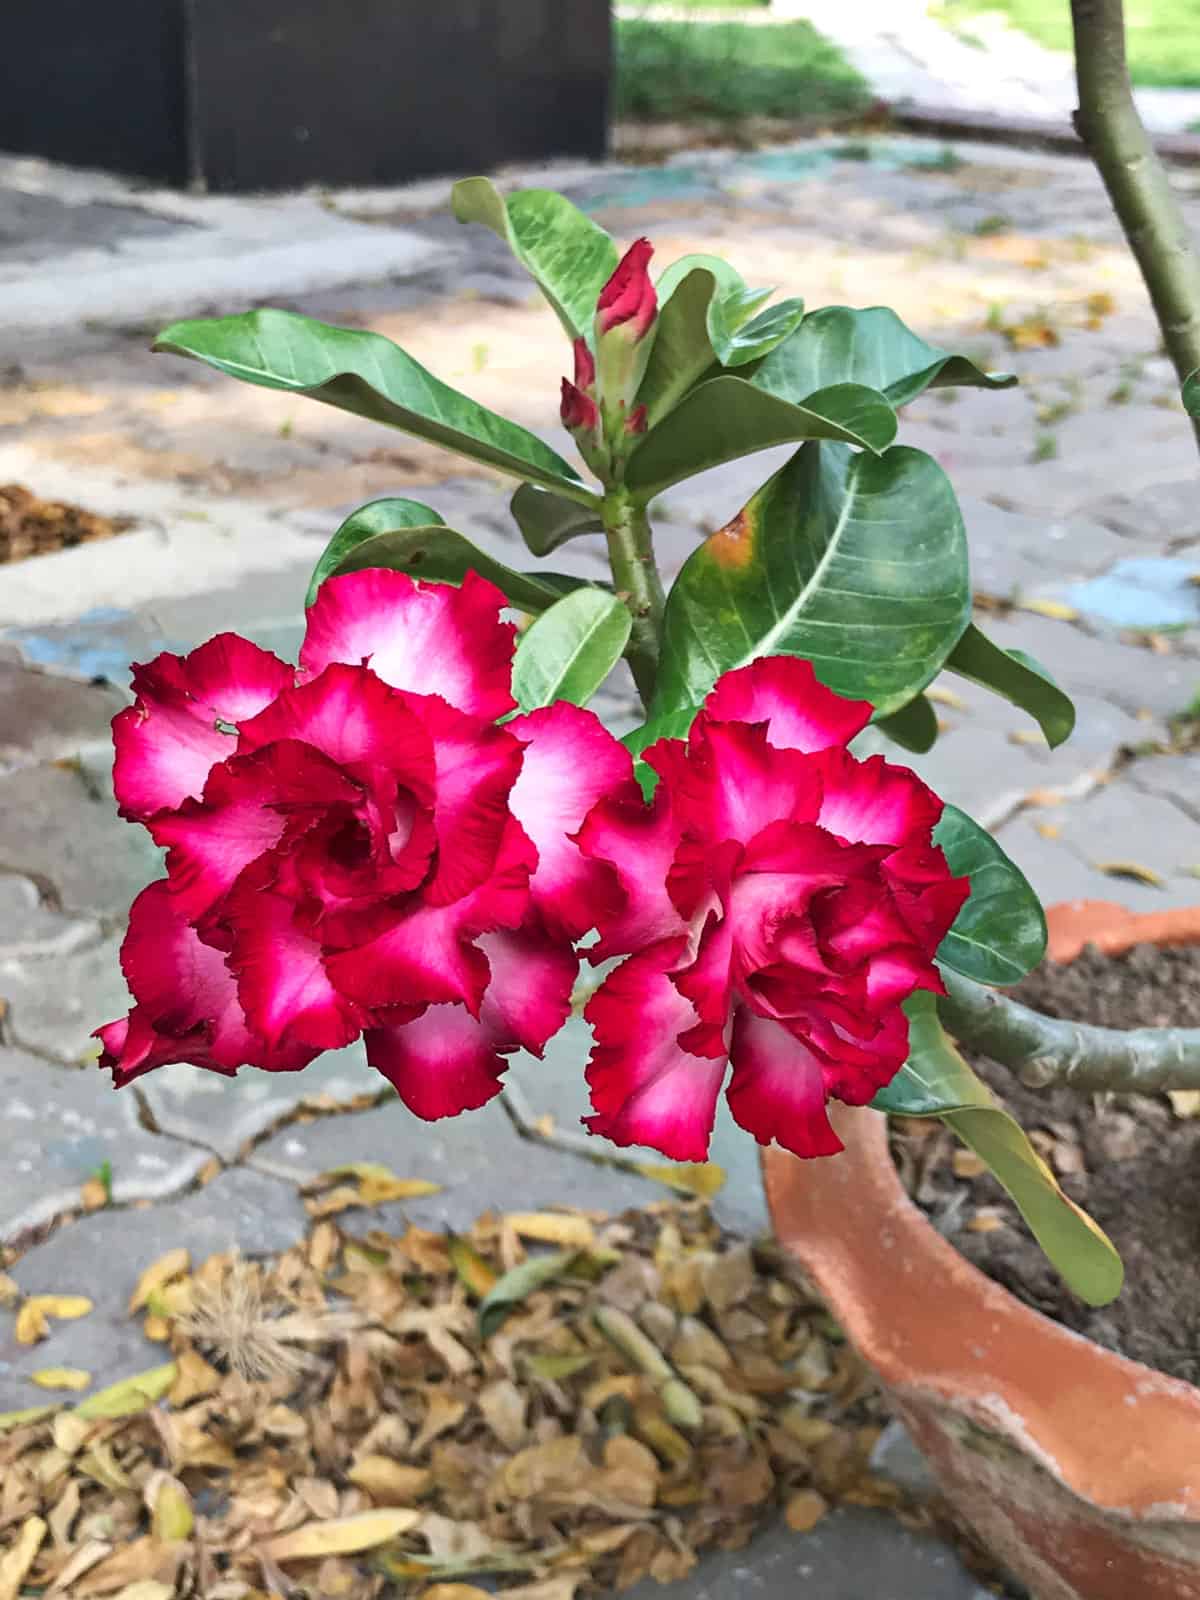 A gorgeous desert rose tree with blooming bright pink leaves